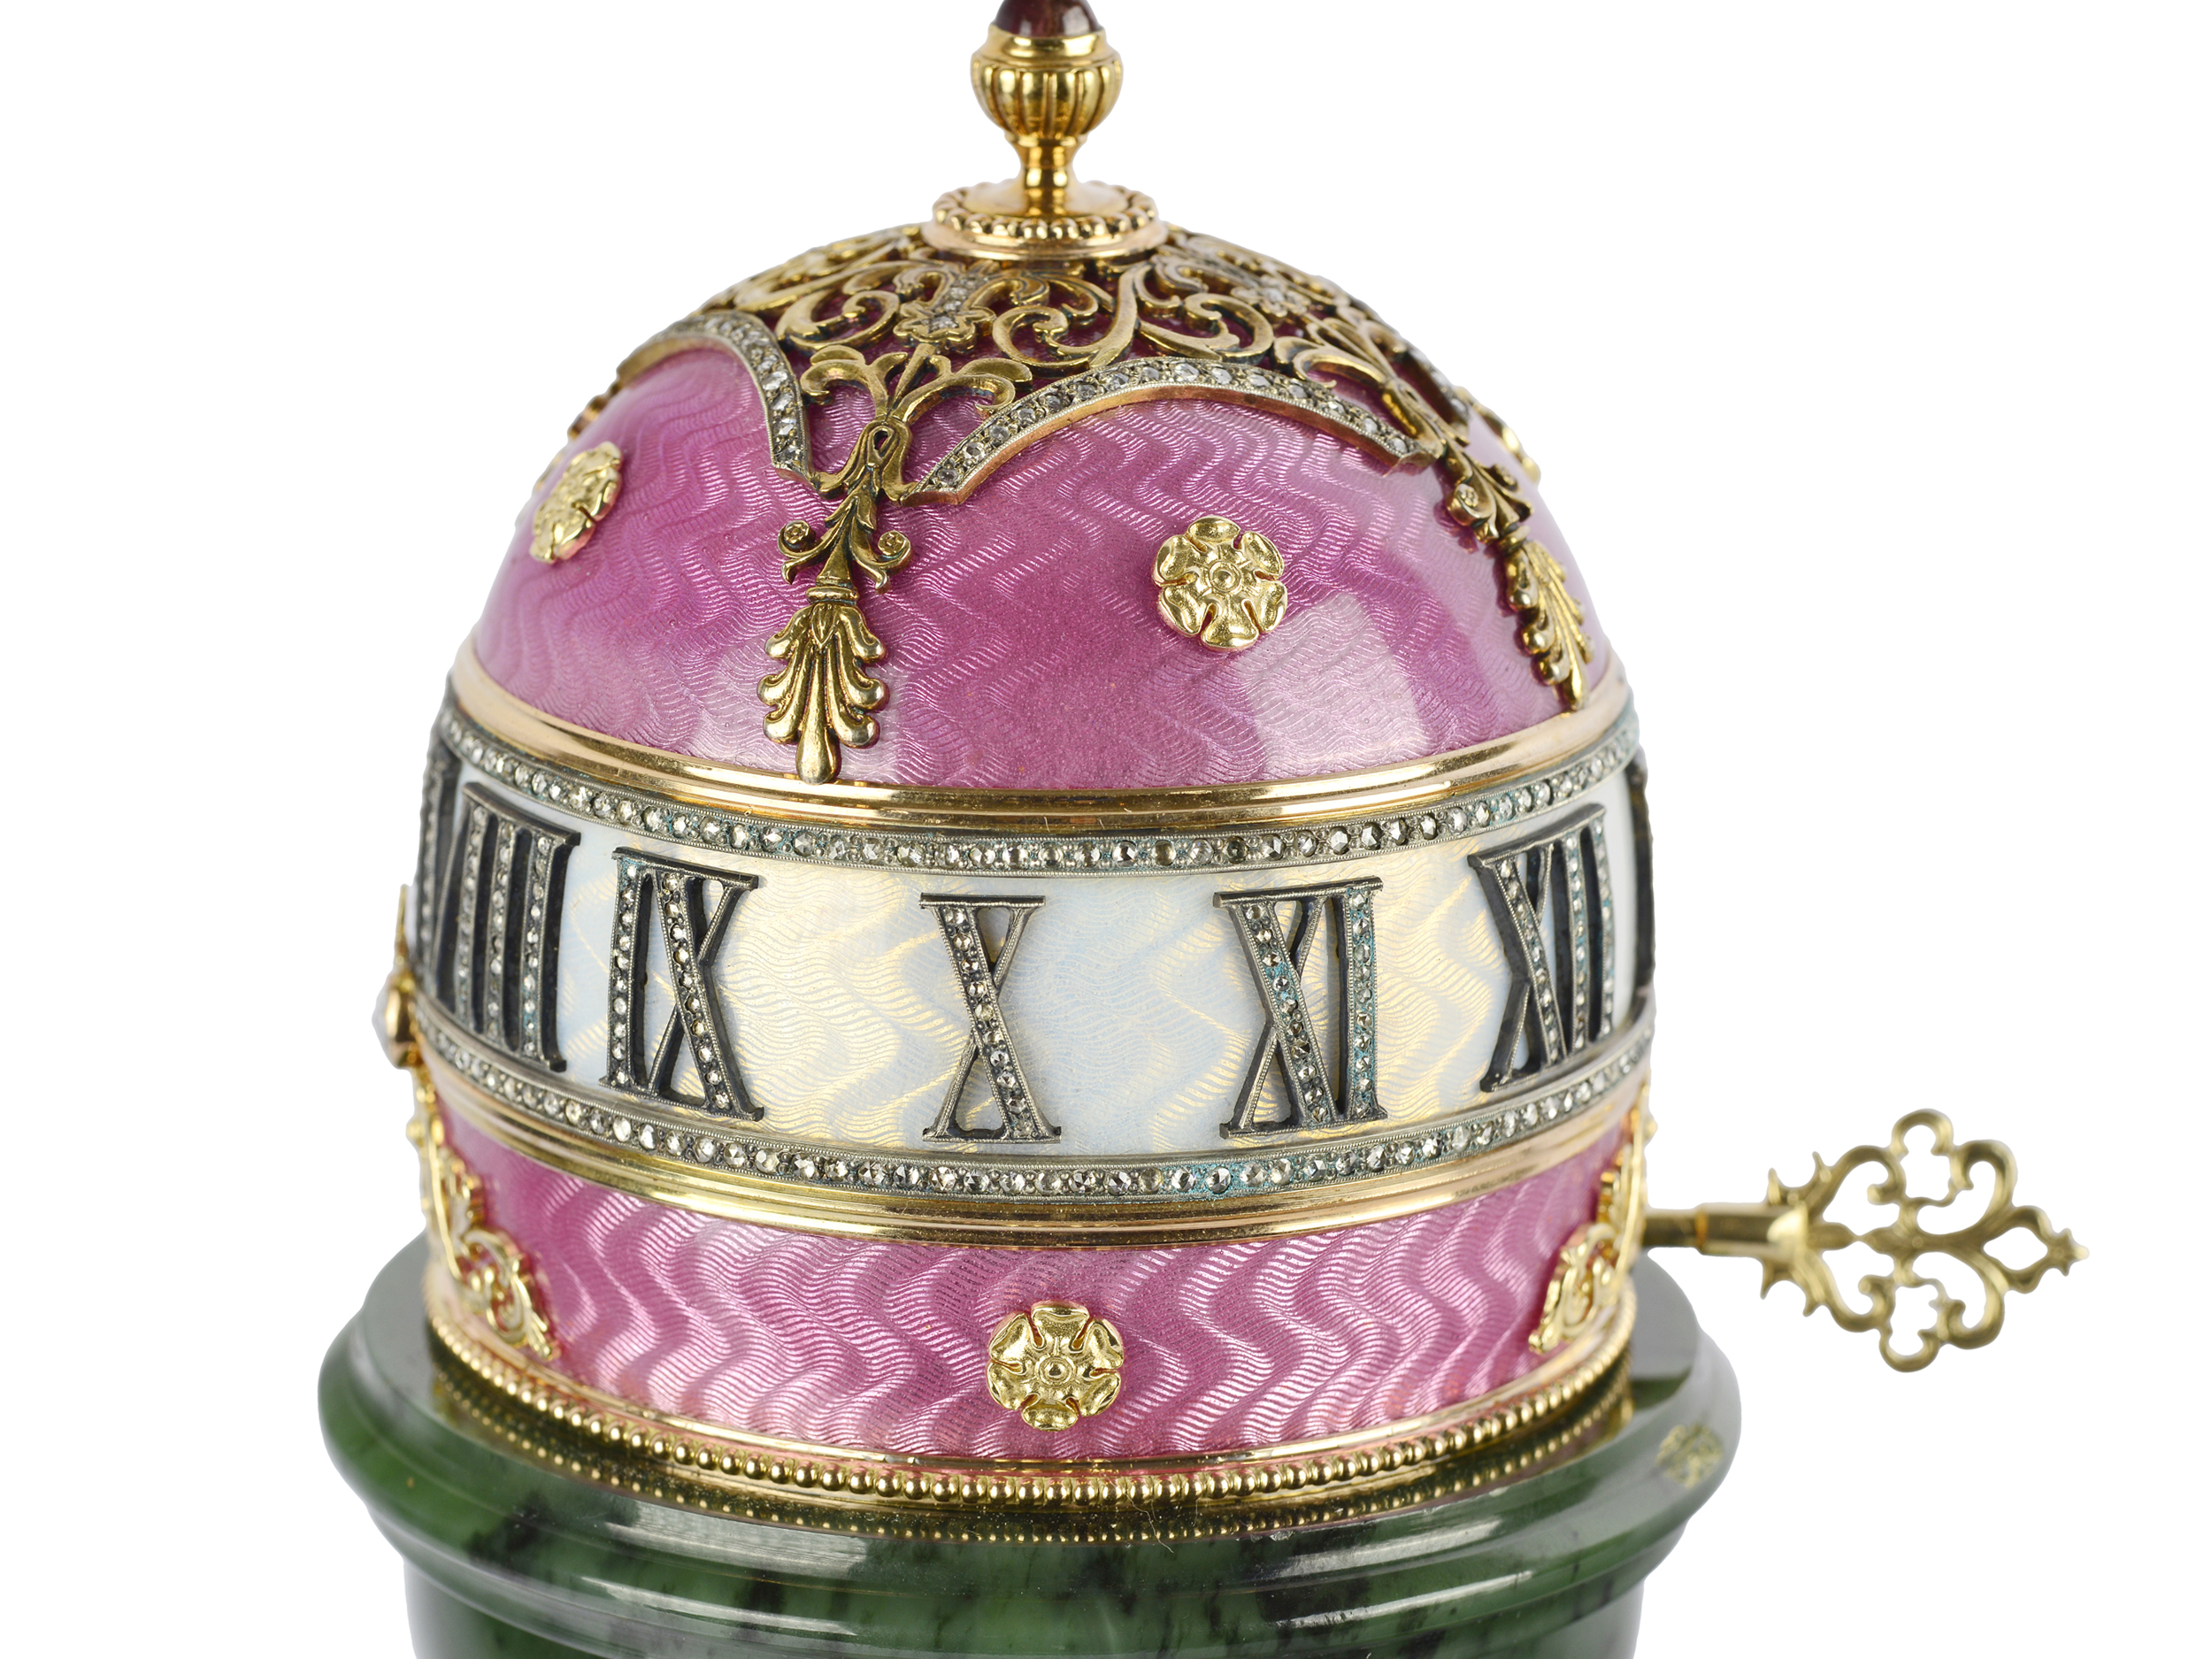 A highly significant unique colonnade clock in the style of Peter Carl Fabergé, Saint Petersburg 184 - Image 5 of 17